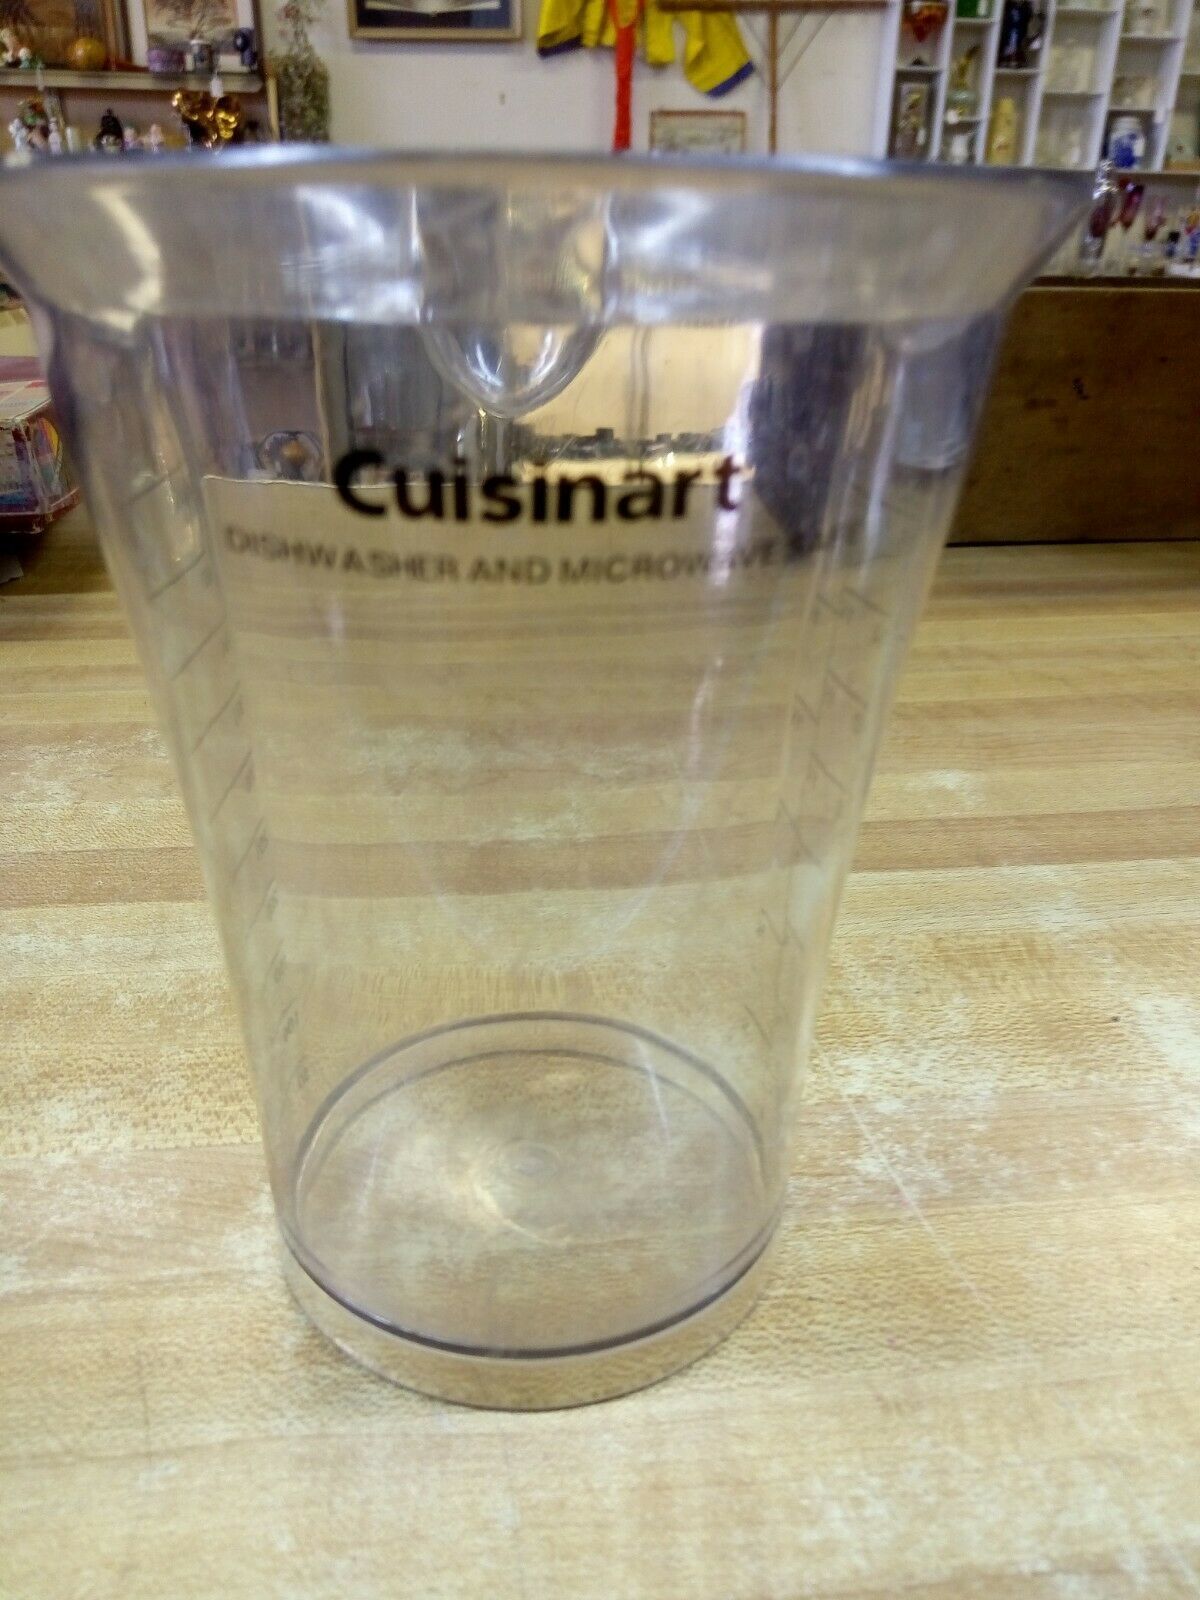 Cuisinart Smart Stick Measuring Cup 500ml / 16 oz / 2 Cups Replacement - $9.89